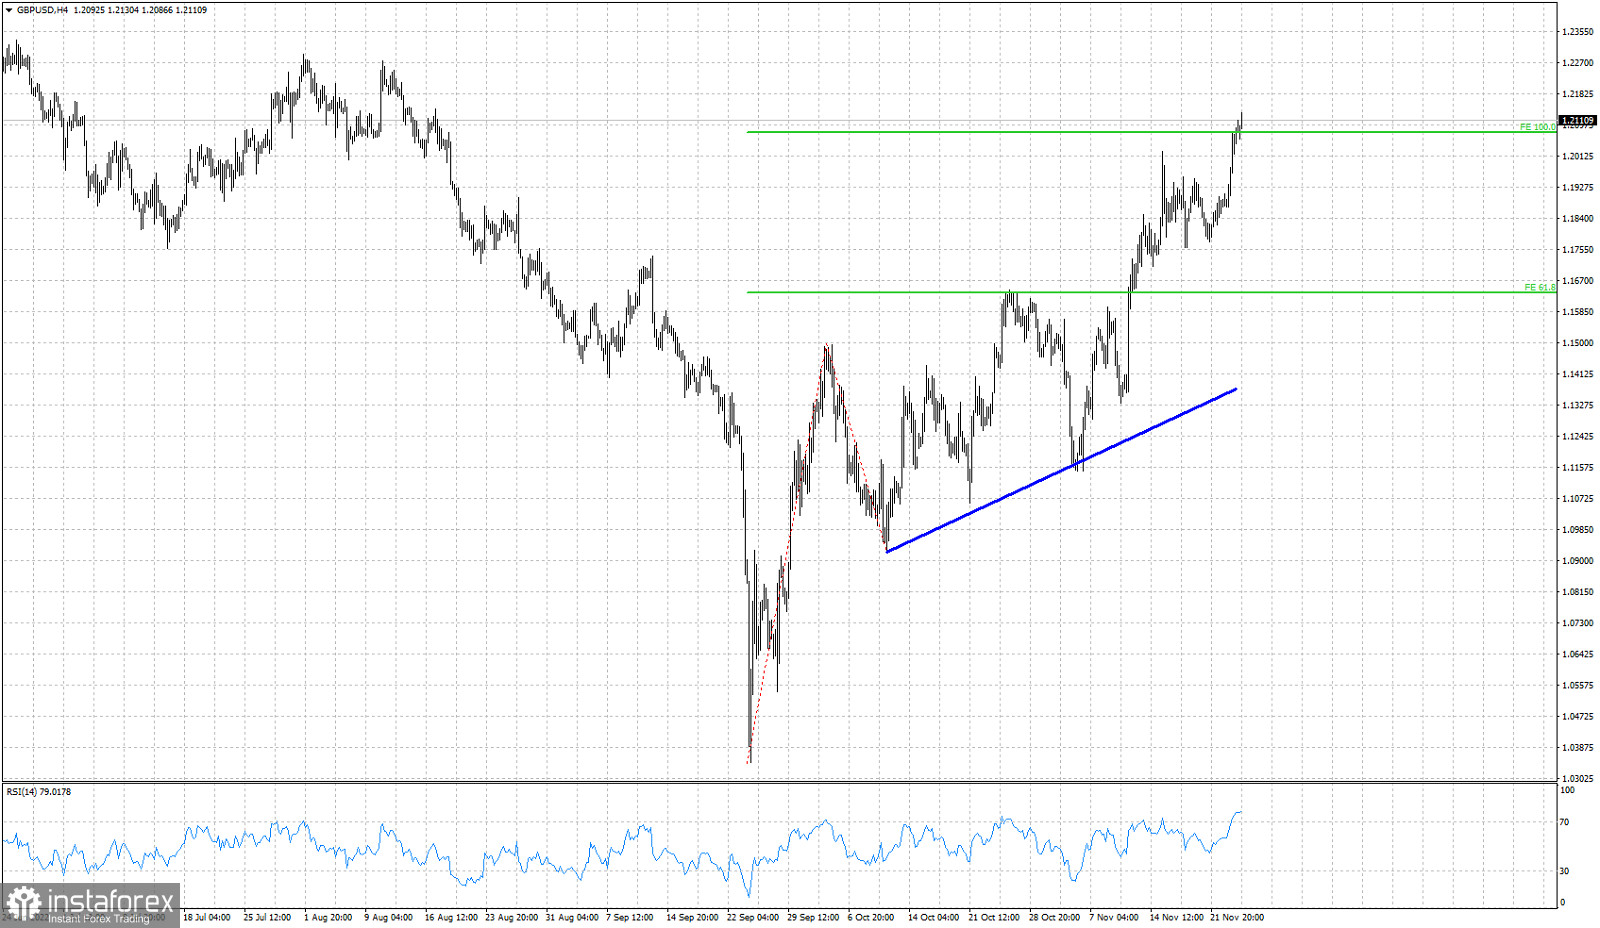 GBPUSD reaches our second target